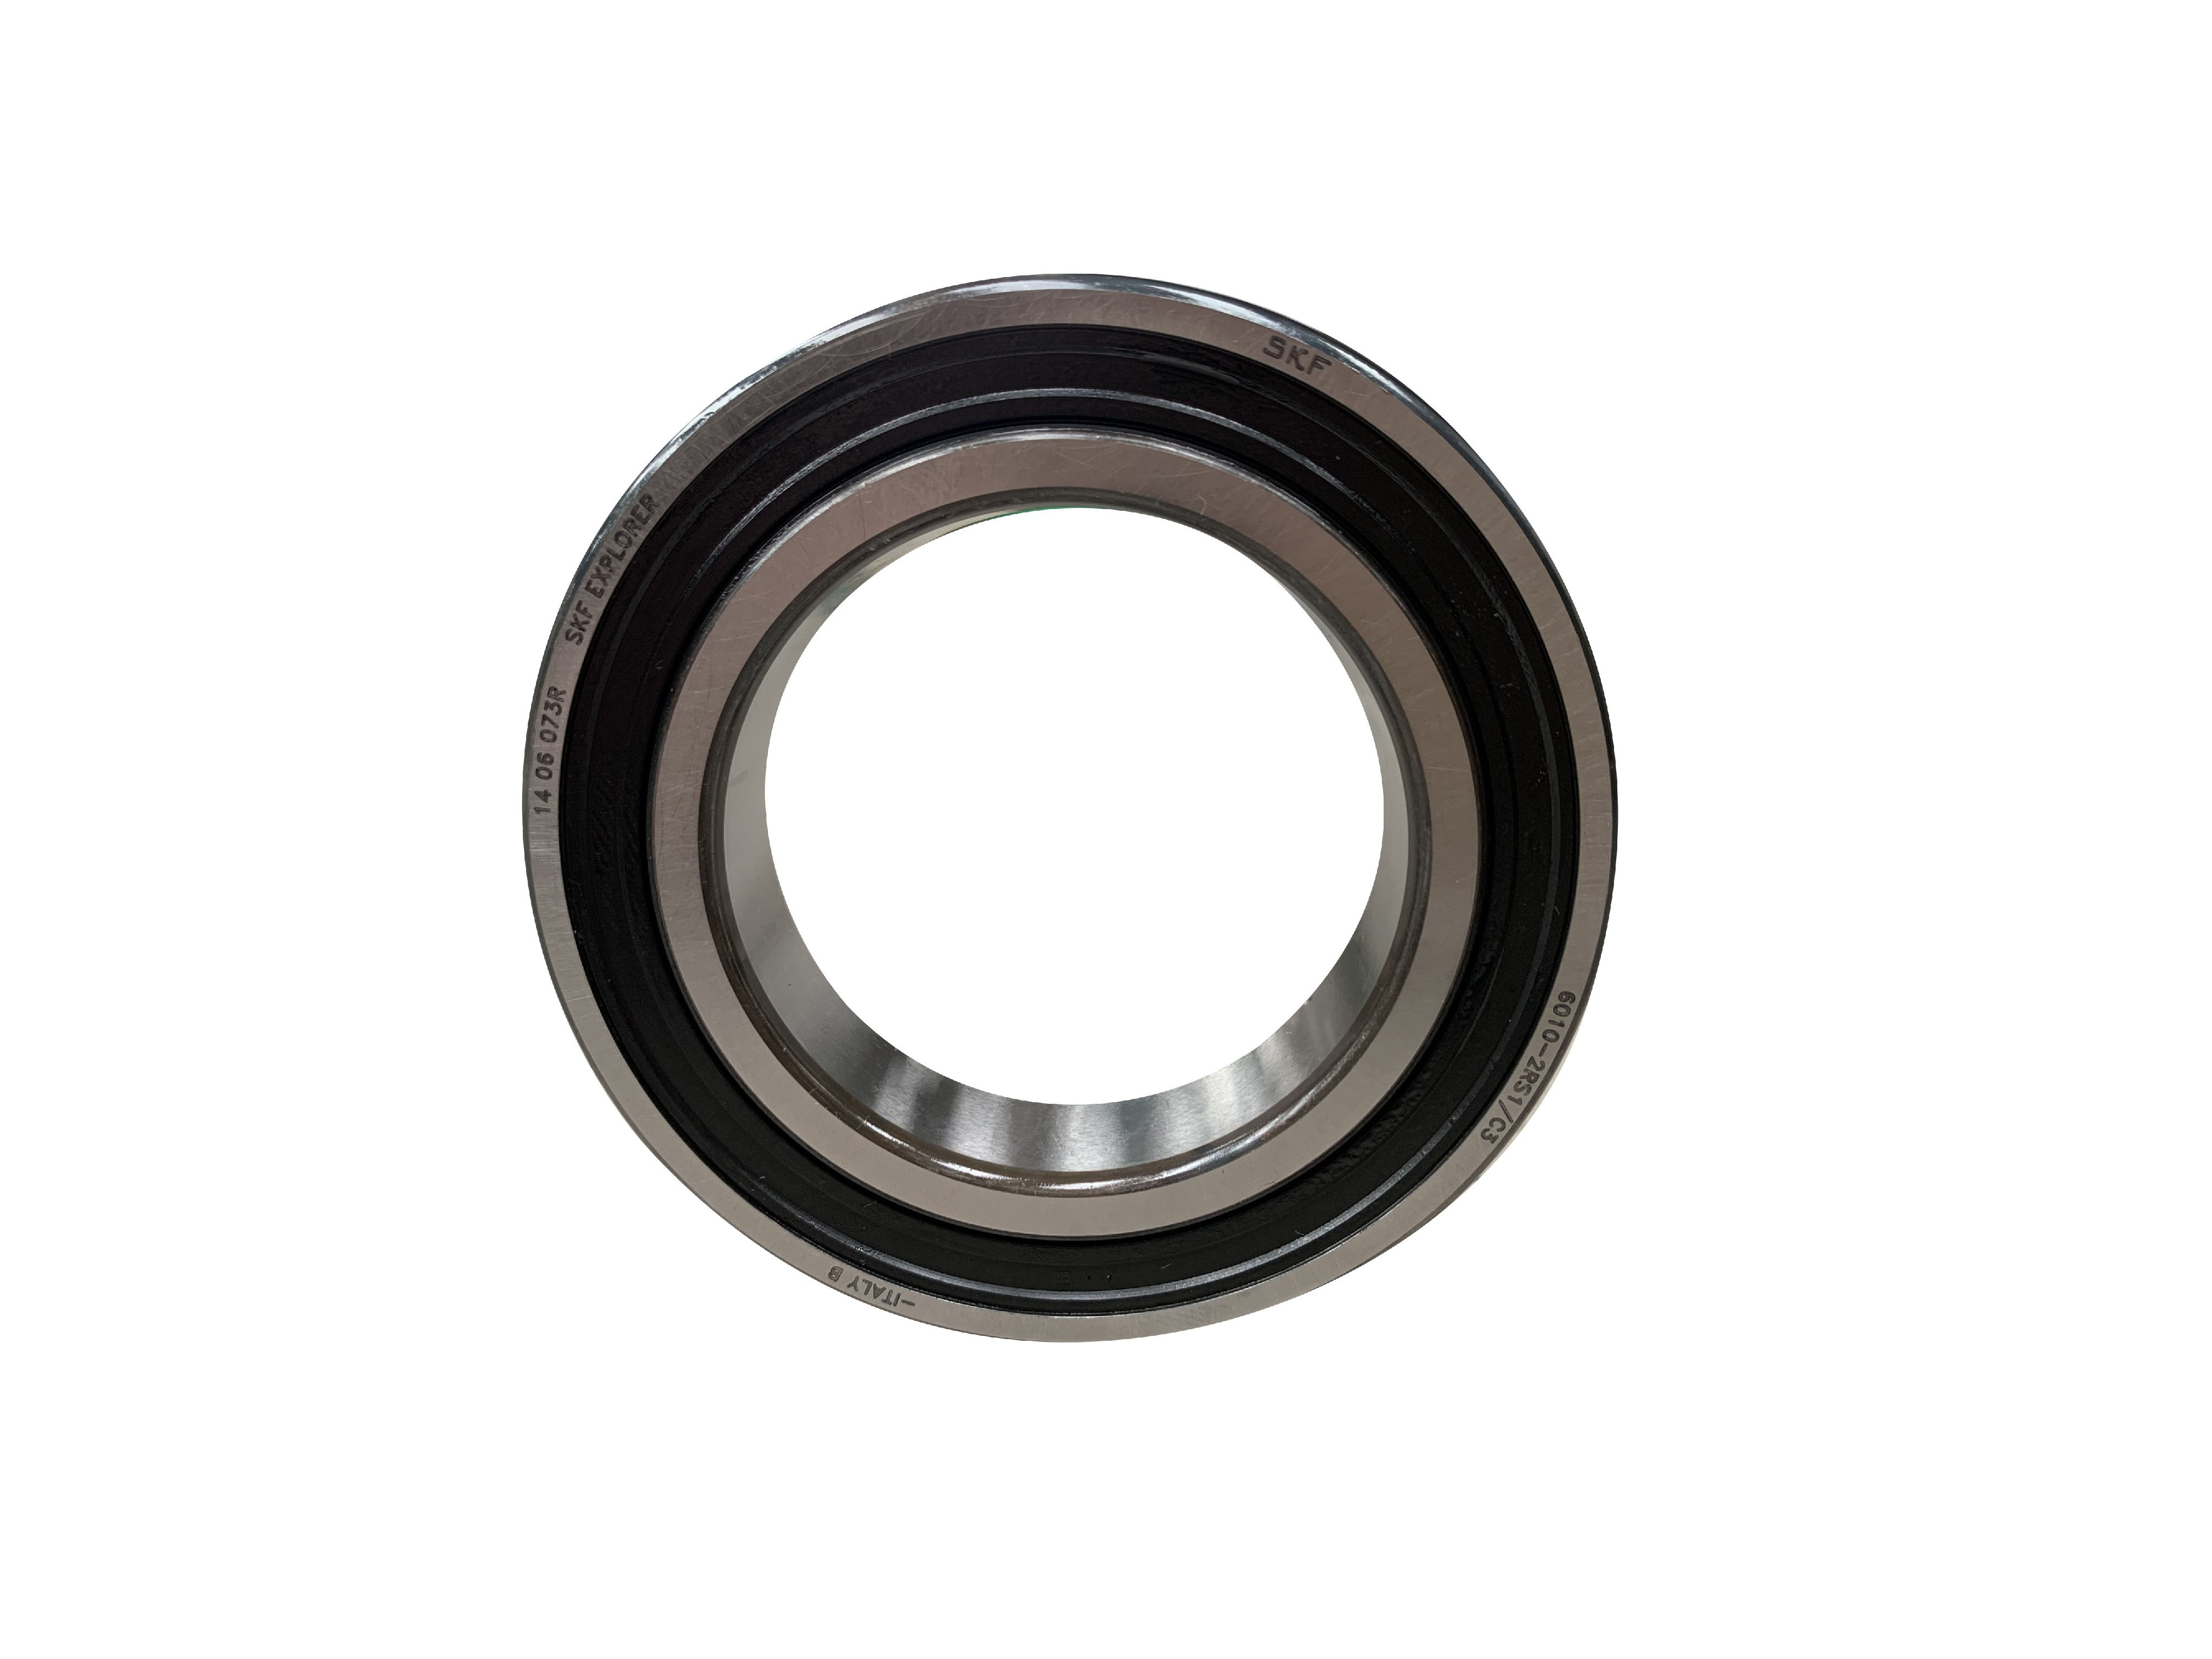 PACK OF 10 6000-6012 2RS RUBBER SEALED DEEP GROOVE BALL BEARING CHOOSE SIZE 